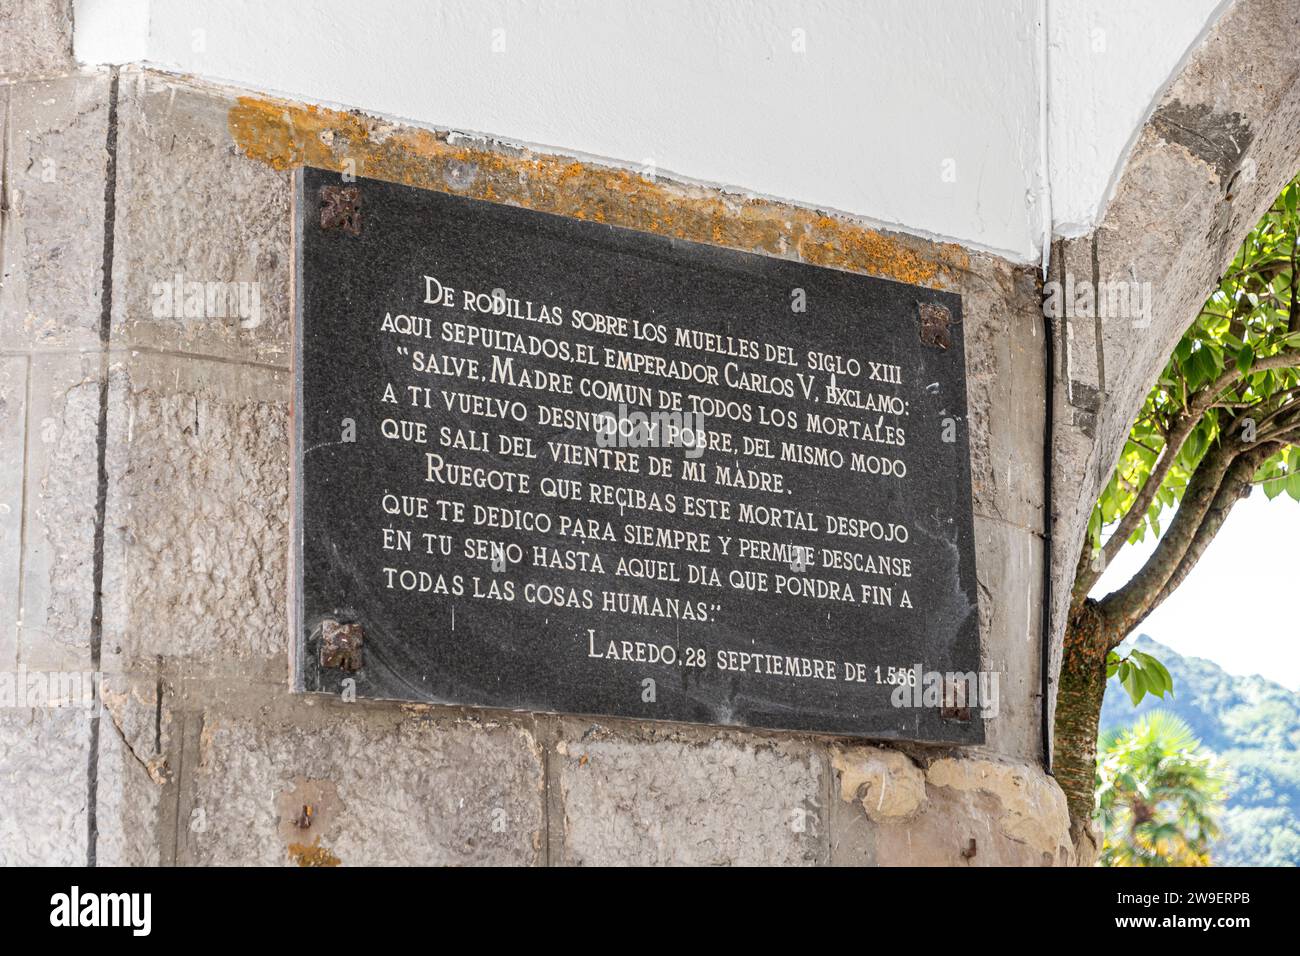 Laredo, Spain. Memorial plaque to Charles V, Holy Roman Emperor, in the Town Hall Stock Photo